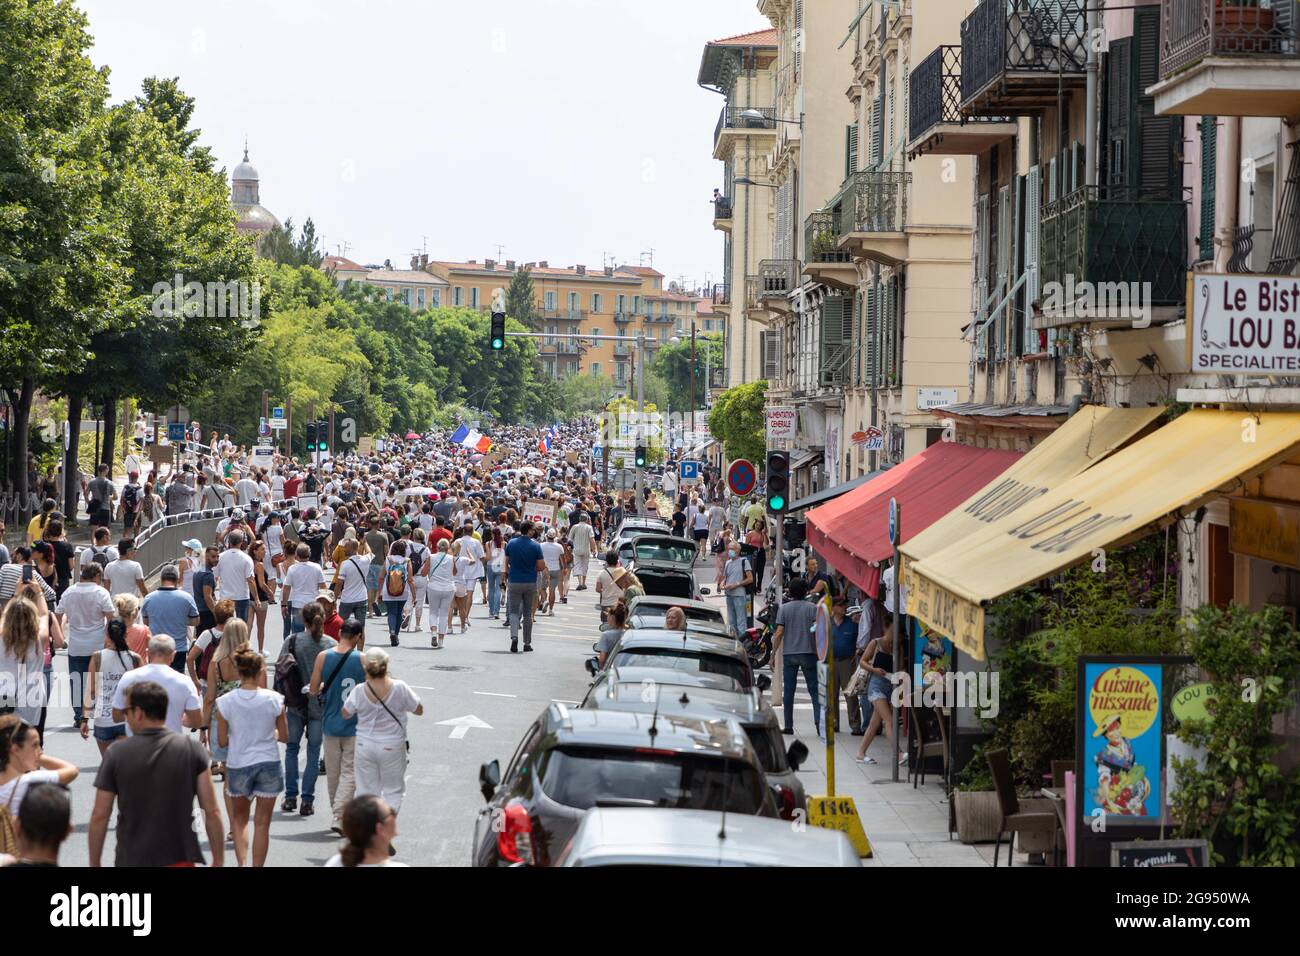 Thousands of demonstrators march through the streets of Nice to protest against the health pass, on July 24, 2021, in Nice, France. Since July 21, people wanting to go to in most public spaces in France have to show a proof of Covid-19 vaccination or a negative test, as the country braces for a feared spike in cases from the highly transmissible Covid-19 Delta variant. Photo by Lucie Choquet/ABACAPRESS.COM Stock Photo